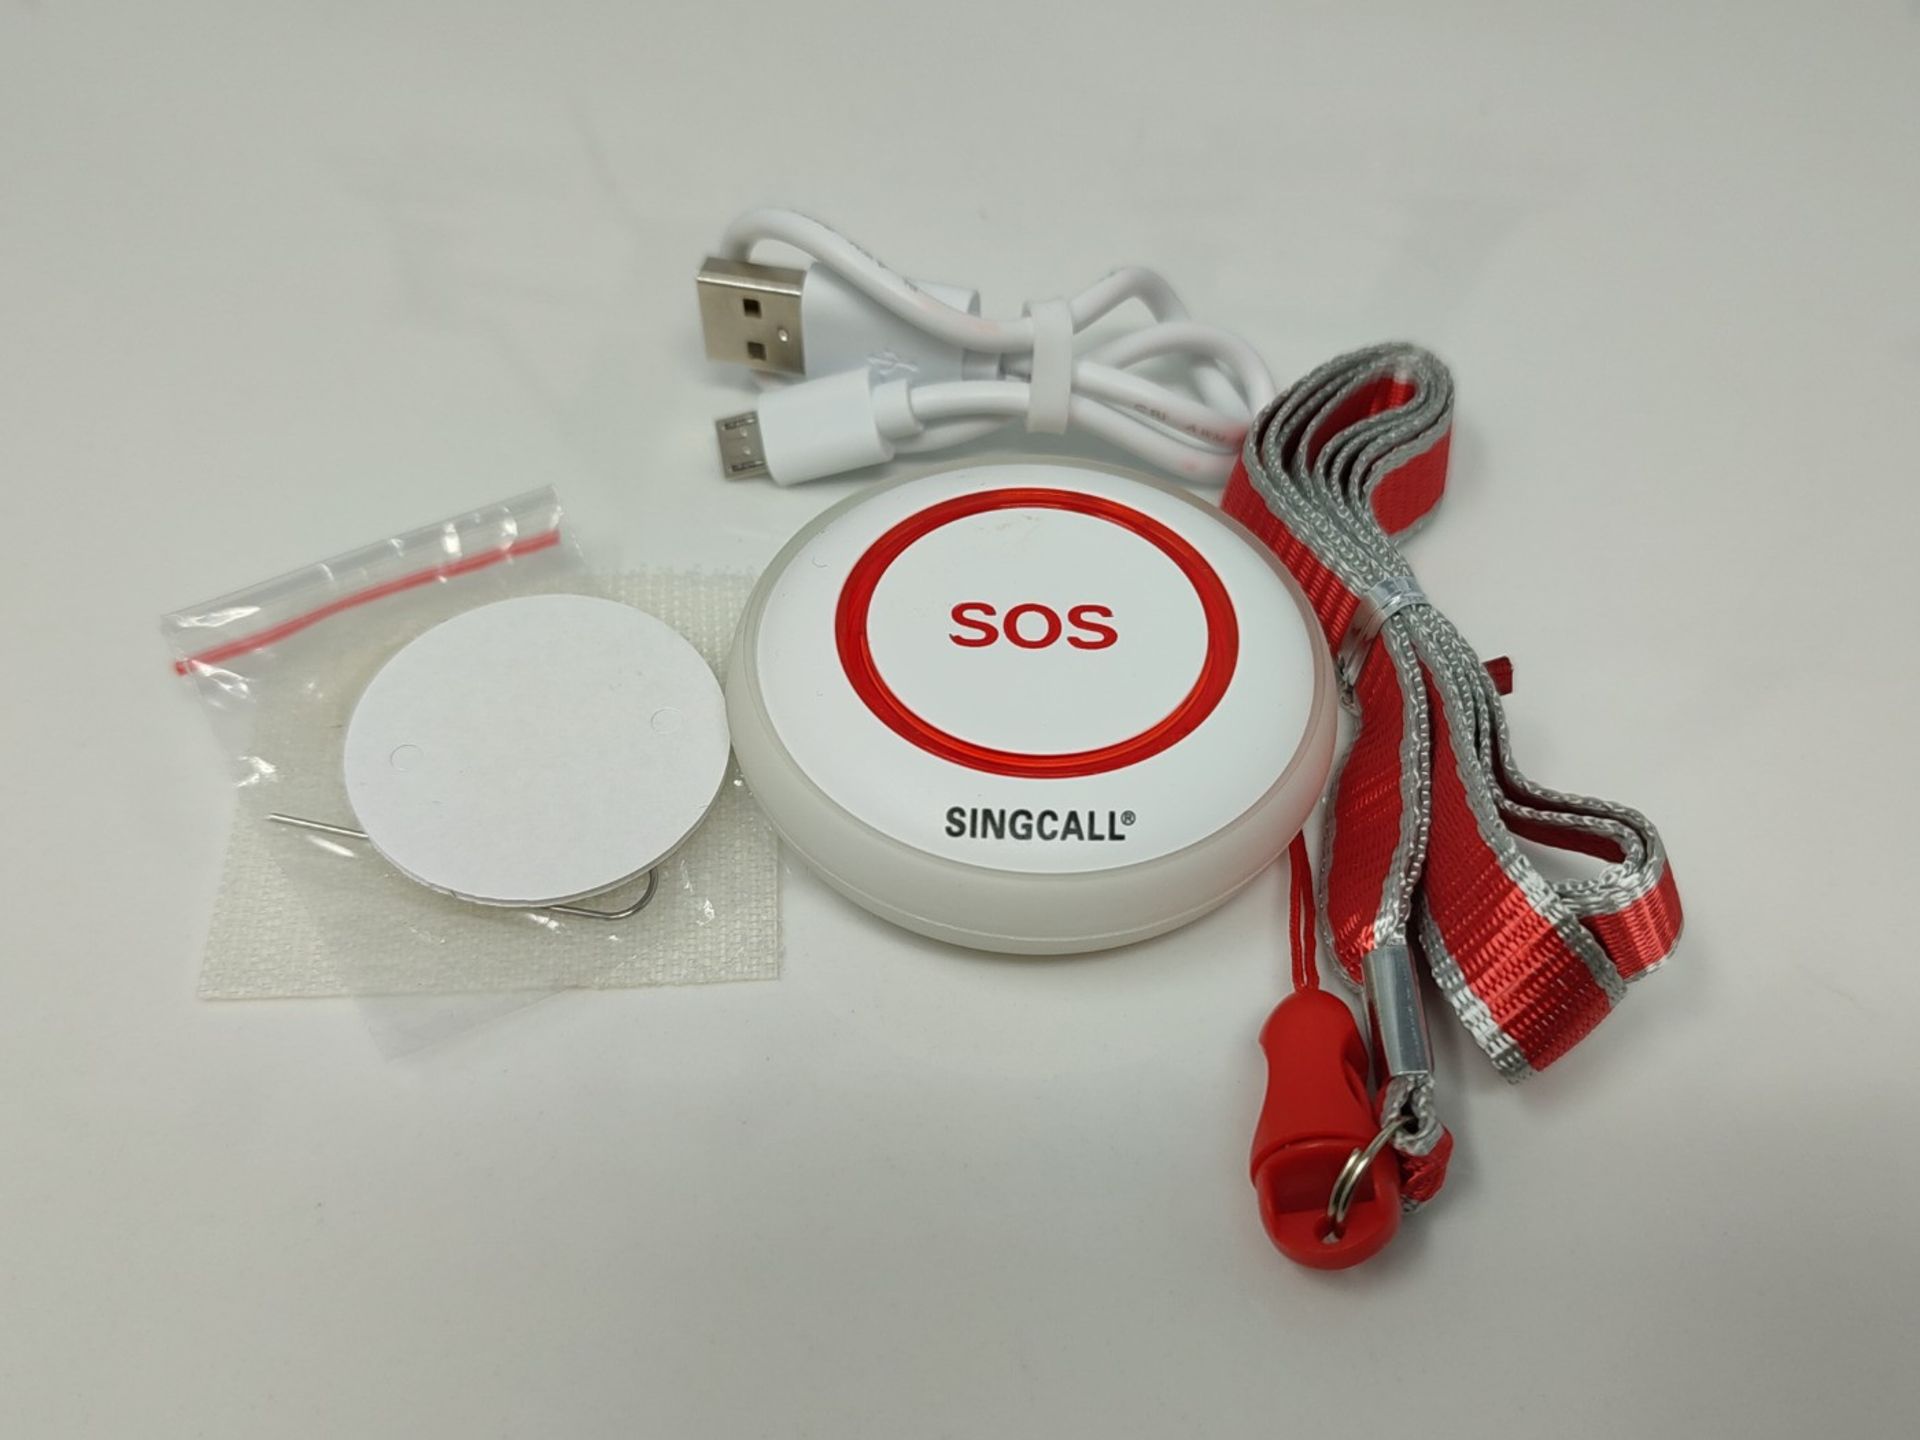 SINGCALL Smart SOS Emergency Button Alarm For Handicapped Caregiver Pager Wireless Nur - Image 2 of 3